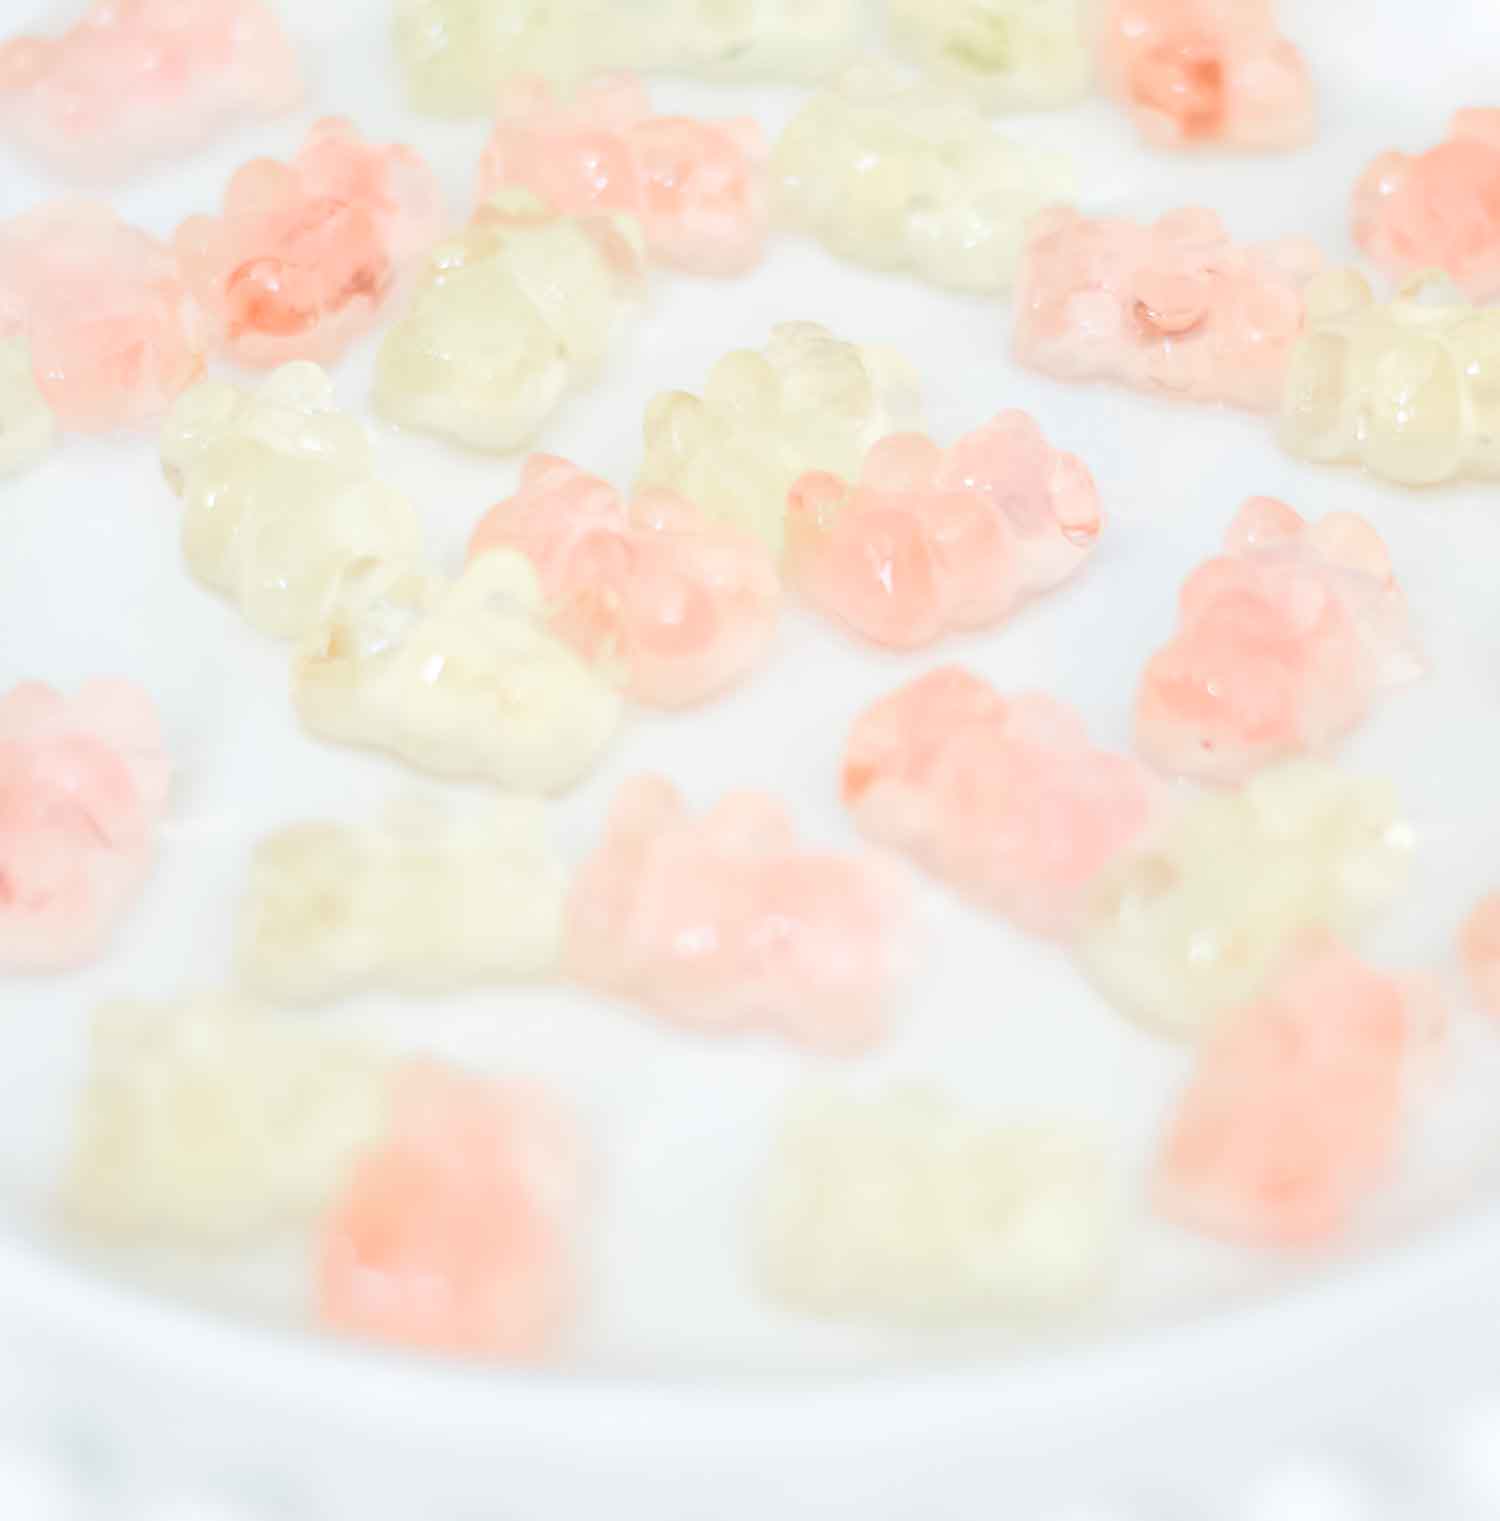 How to make champagne gummy bears by southern lifestyle blogger Stephanie Ziajka from Diary of a Debutante, easy champagne soaked gummy bears recipe using Sugarfina Champagne Bears Gummy Candy